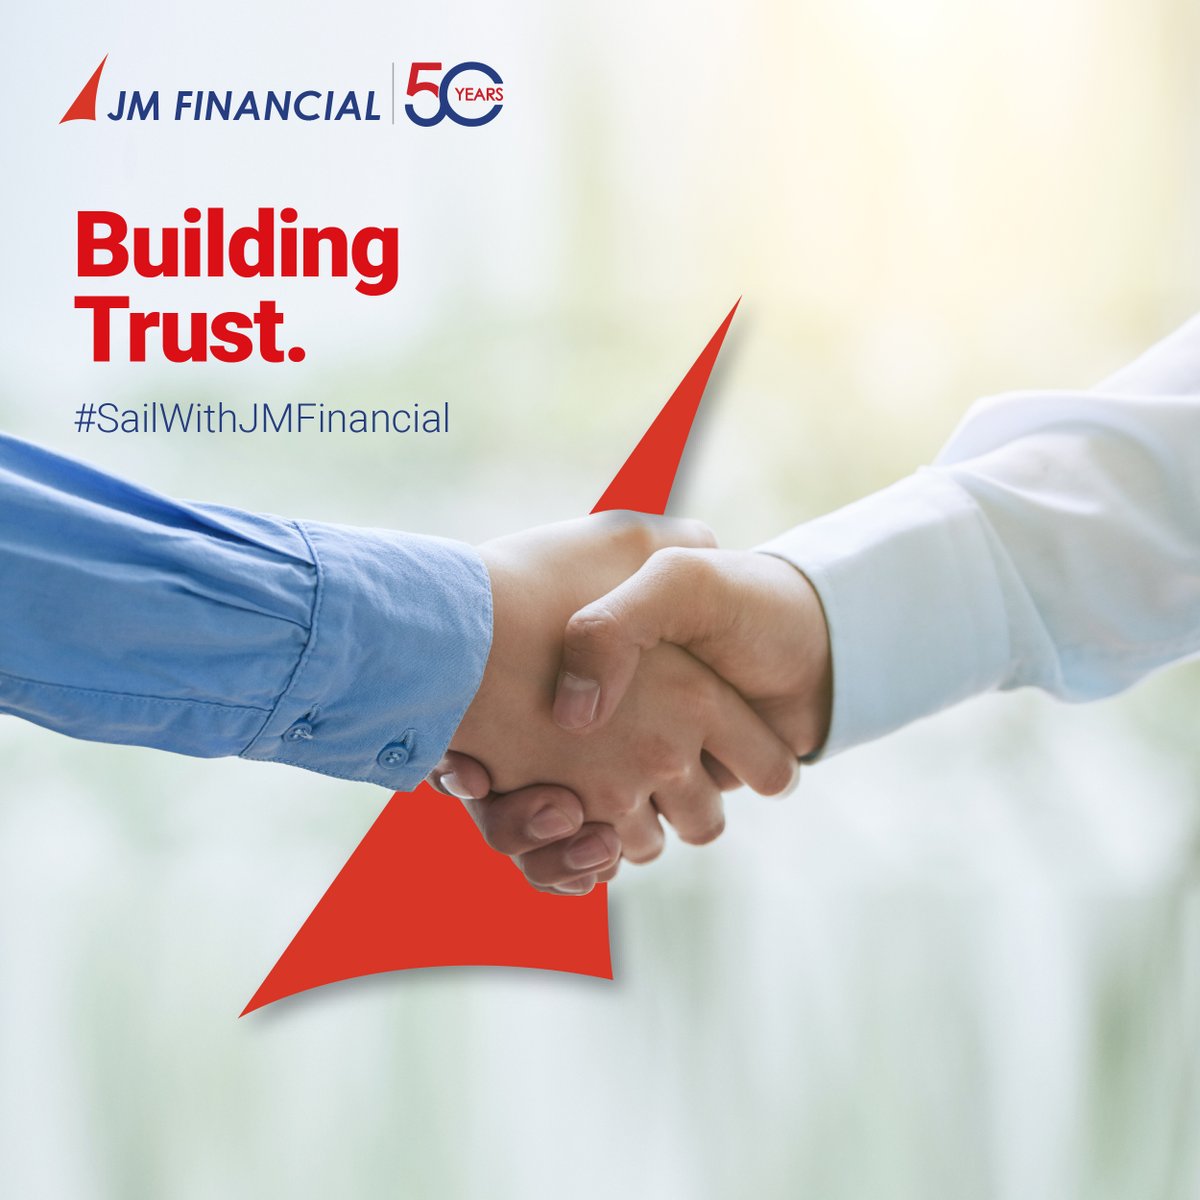 Trust is at the heart of every strong relationship.

#JMFinancial #50yearsofJMFinancial #SailWithJMFinancial